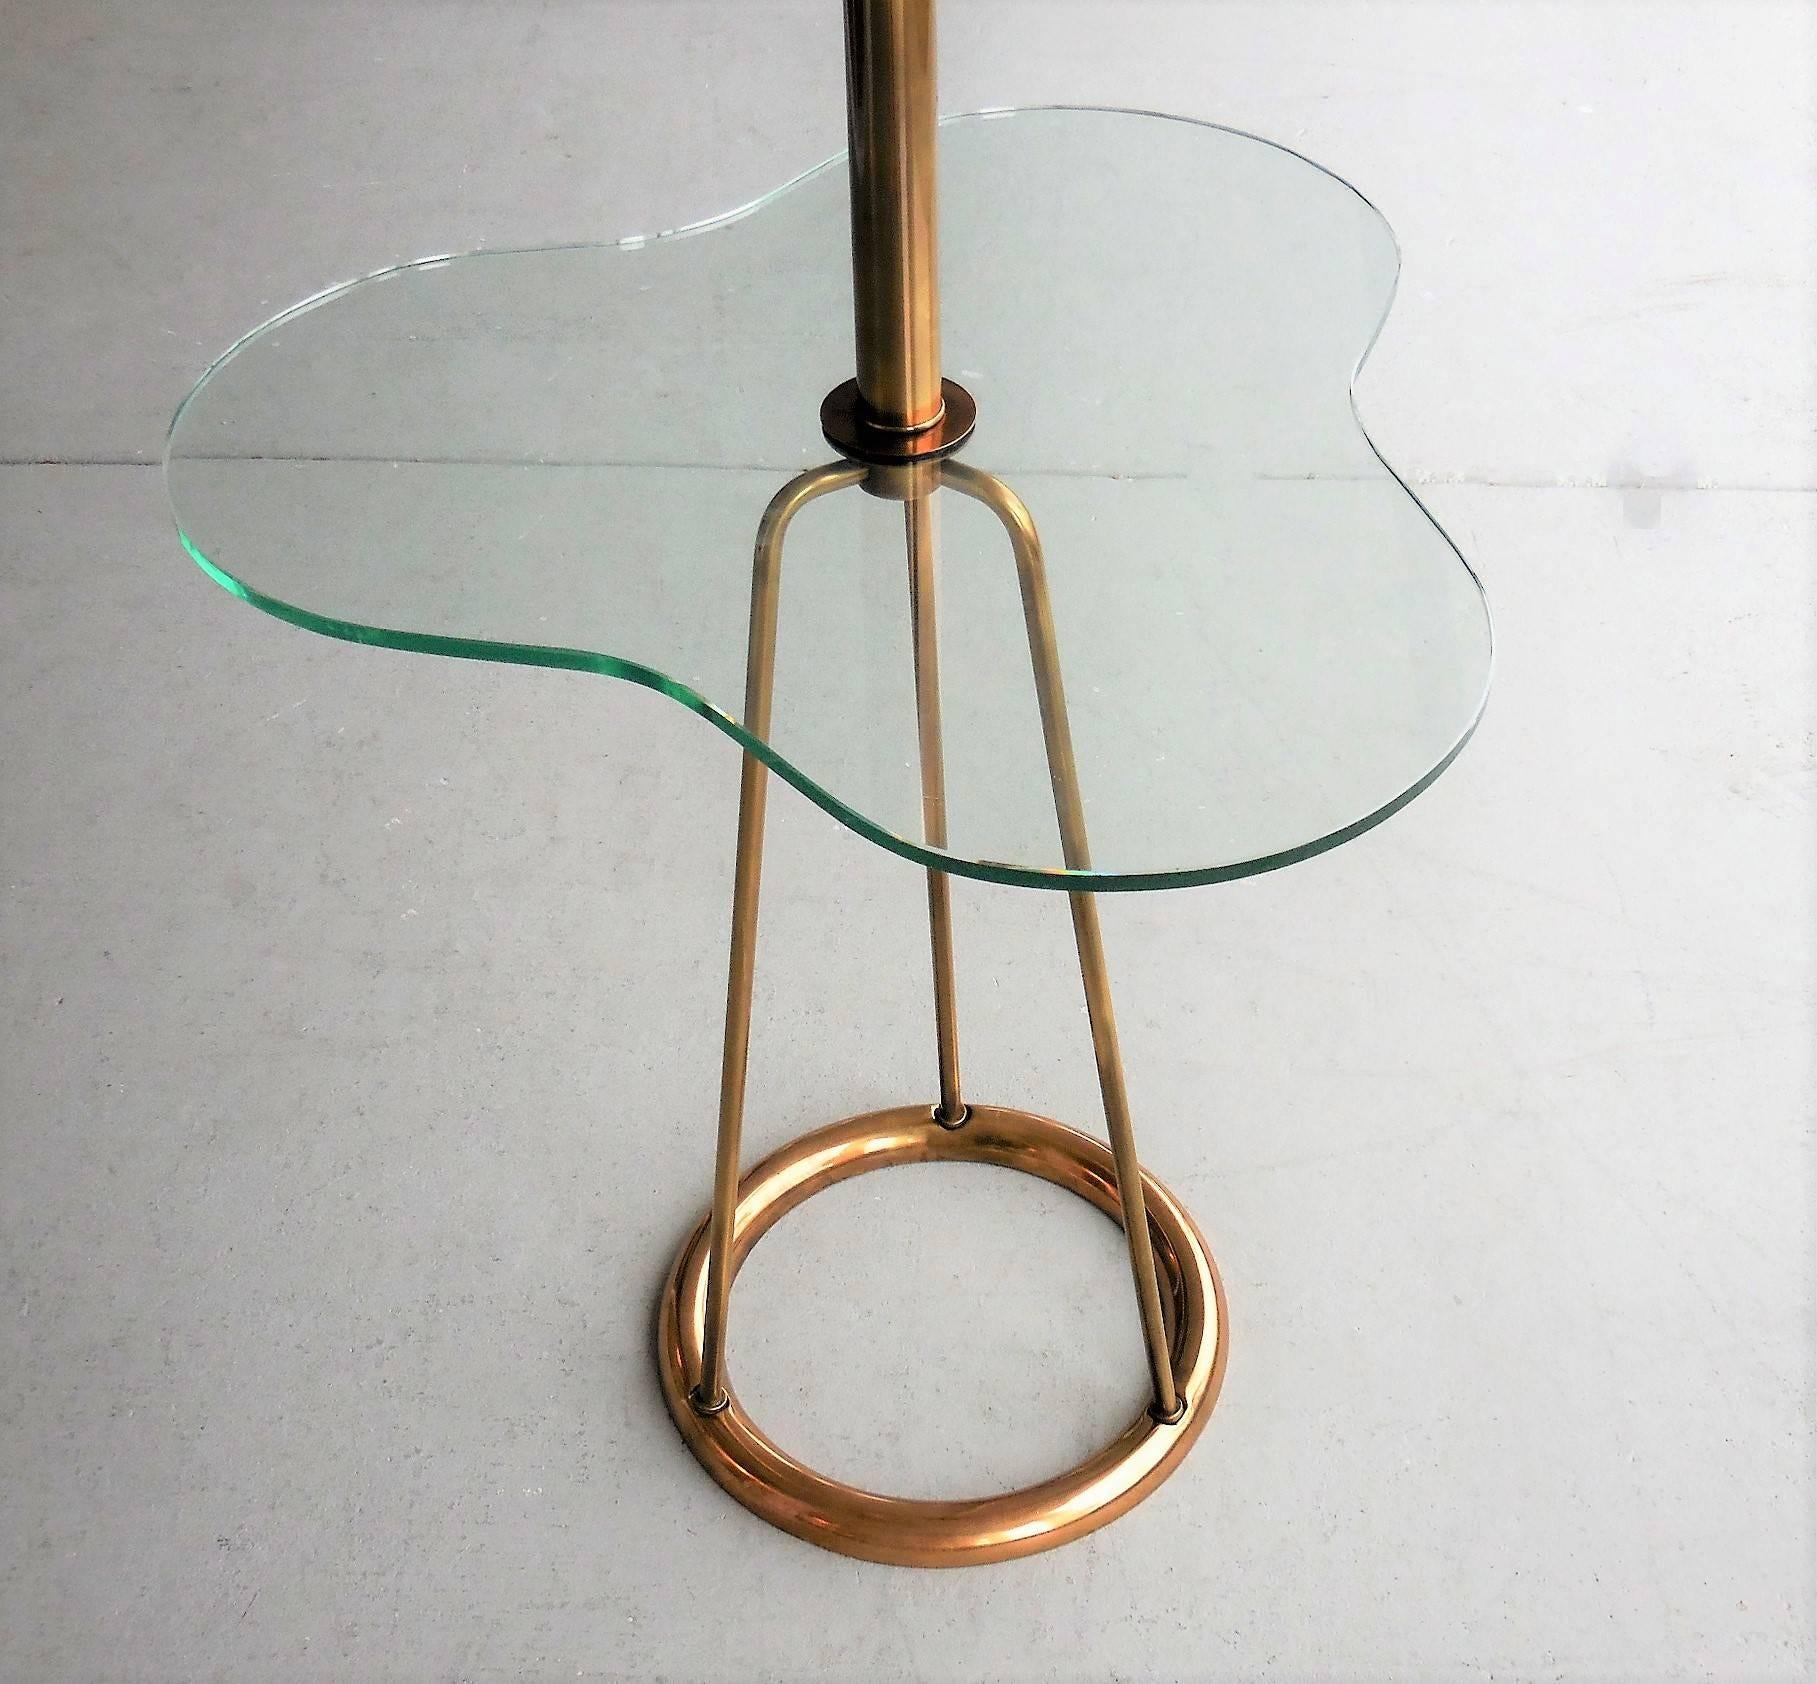 A Mid-Century floor lamp, bronze frame and free-form glass top. Retains period lampshade. Re-wired.